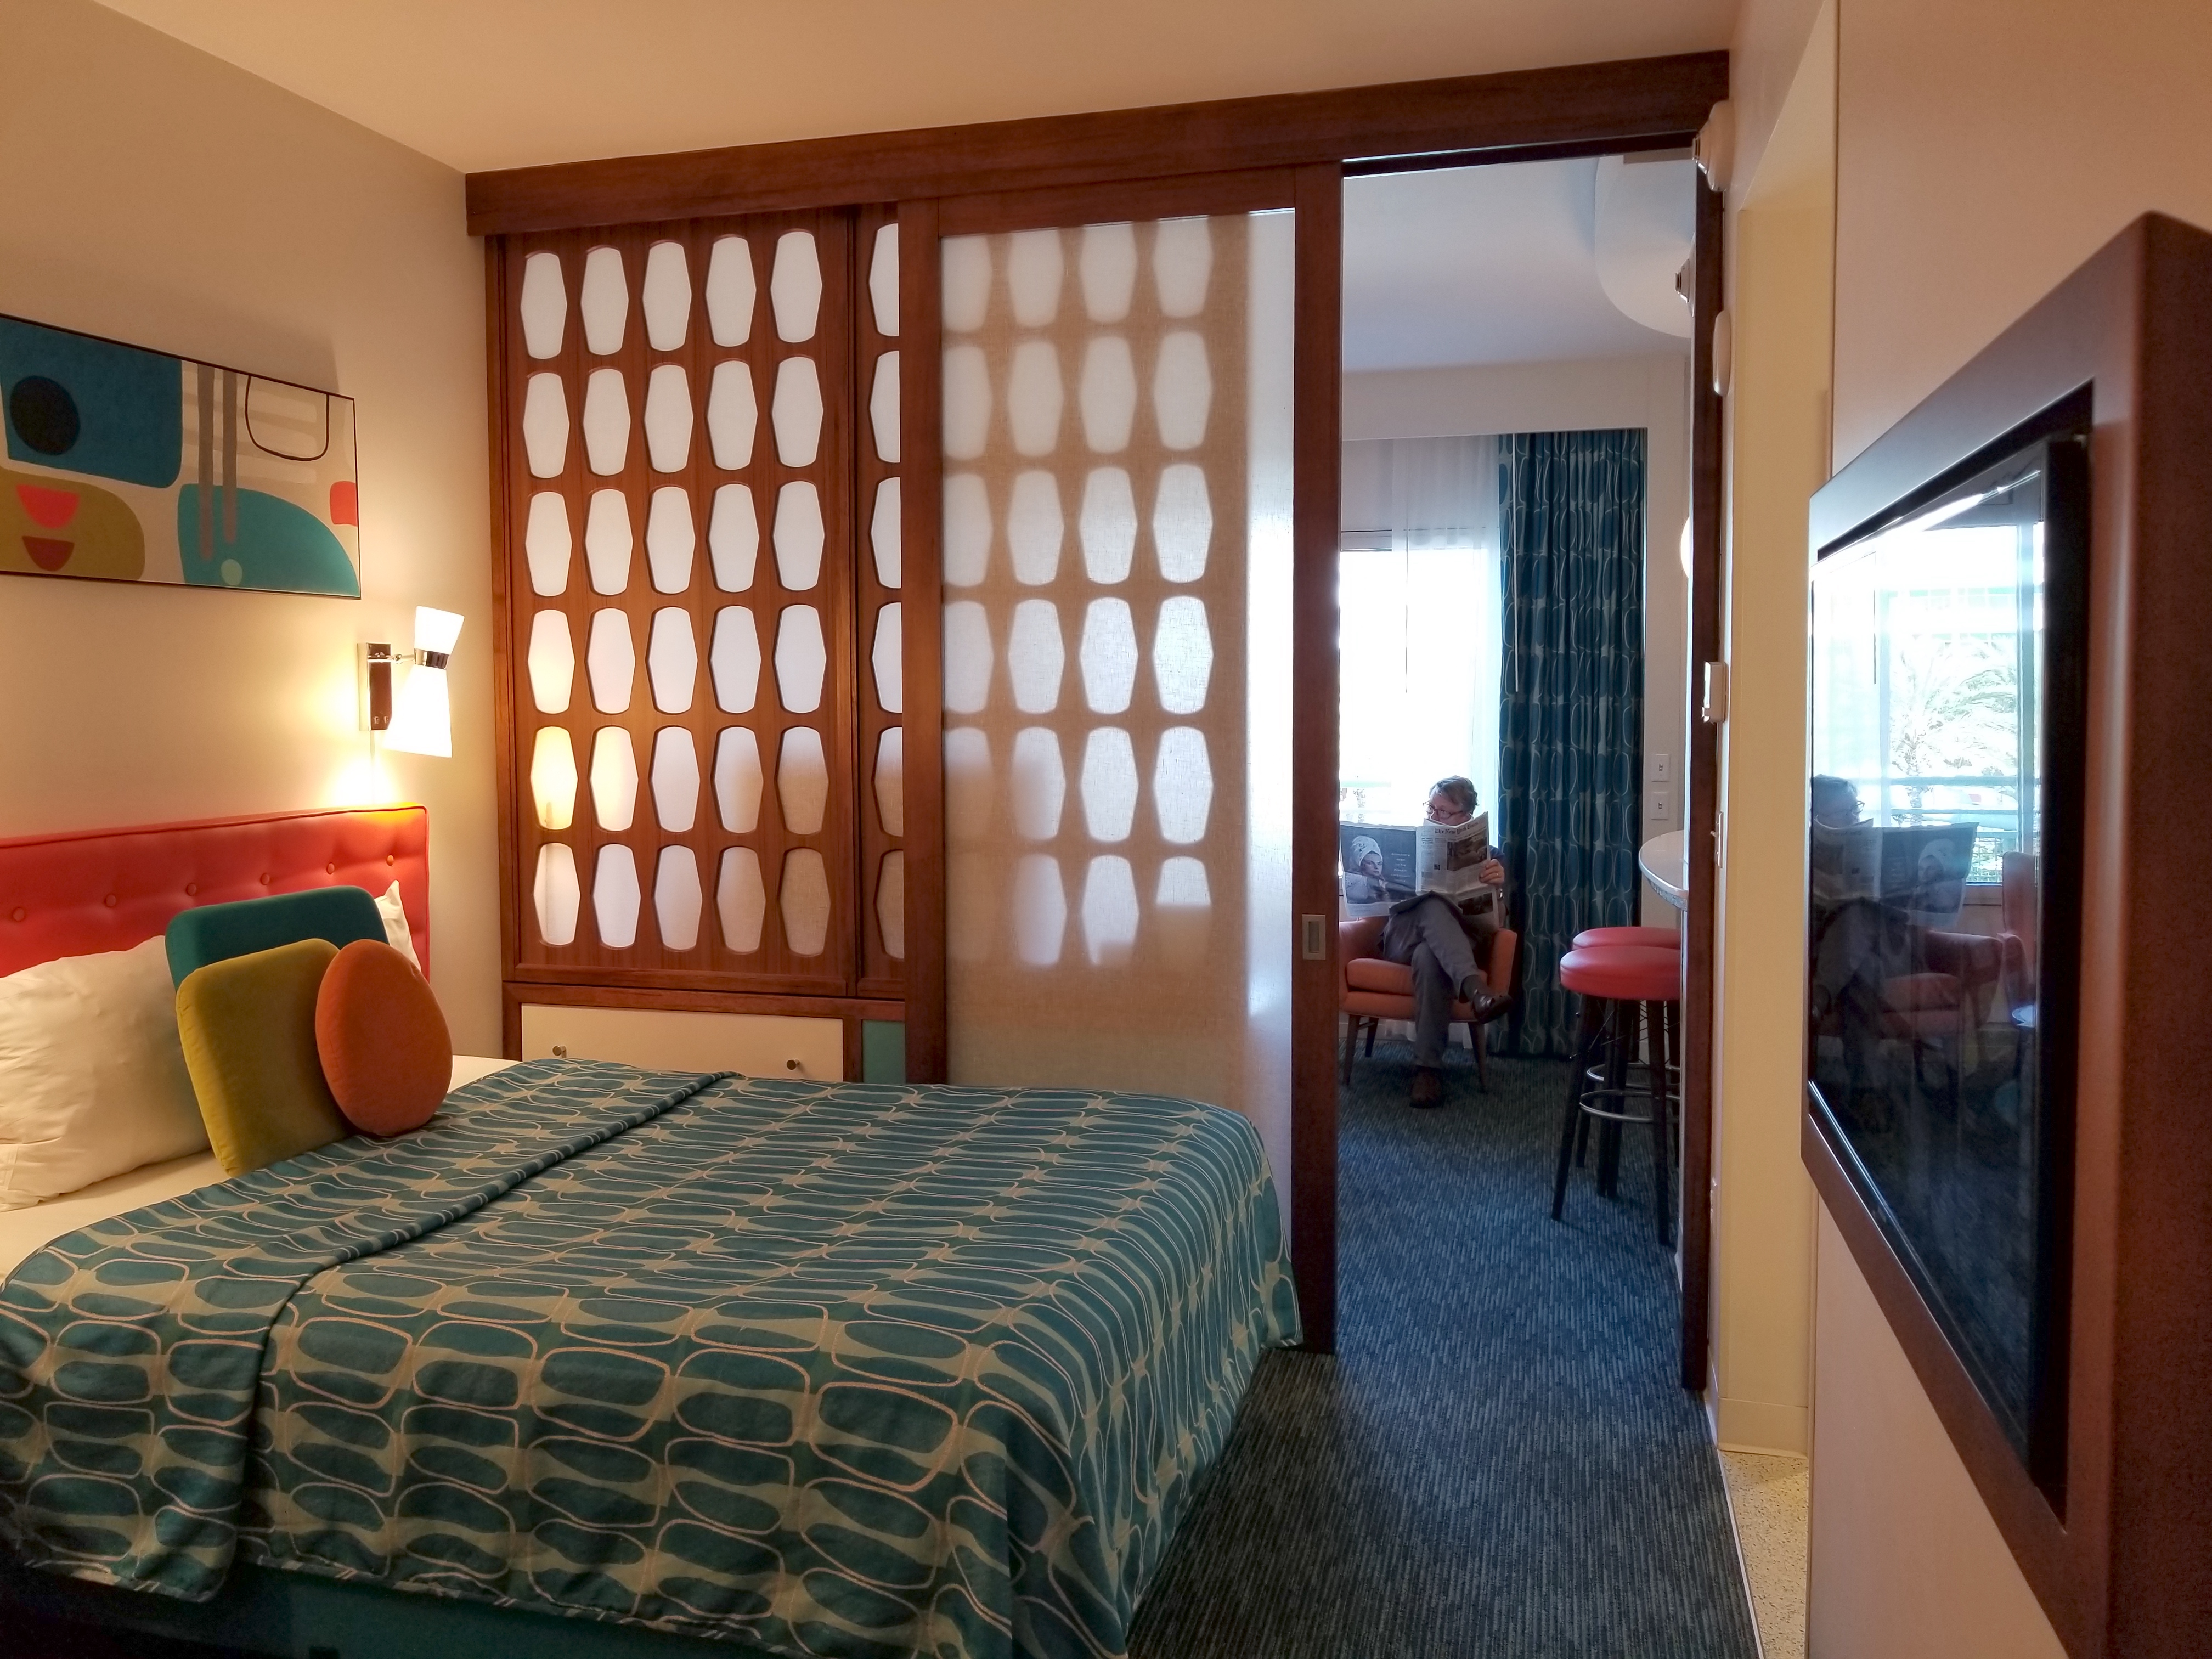 Top Value Cabana Beach Resort For Families At Universal